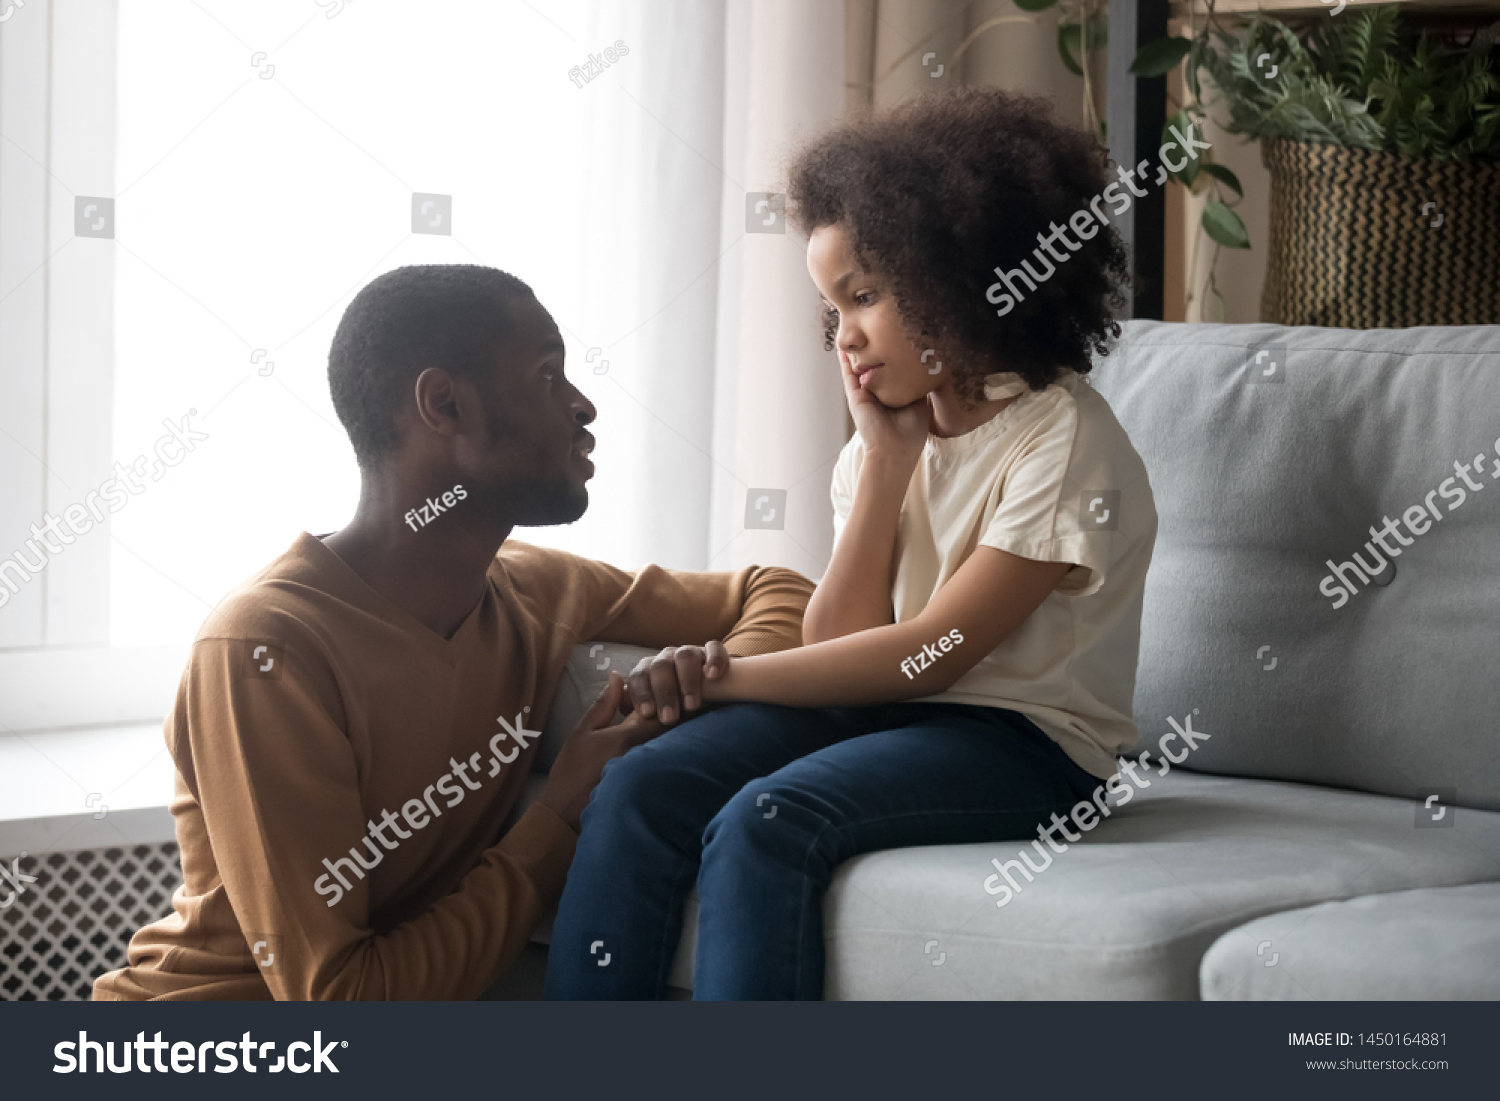 Loving african American father talk with upset preschooler daughter helping with problem, caring black young dad speak with sad girl child holding caressing hand, show support and understanding #1450164881